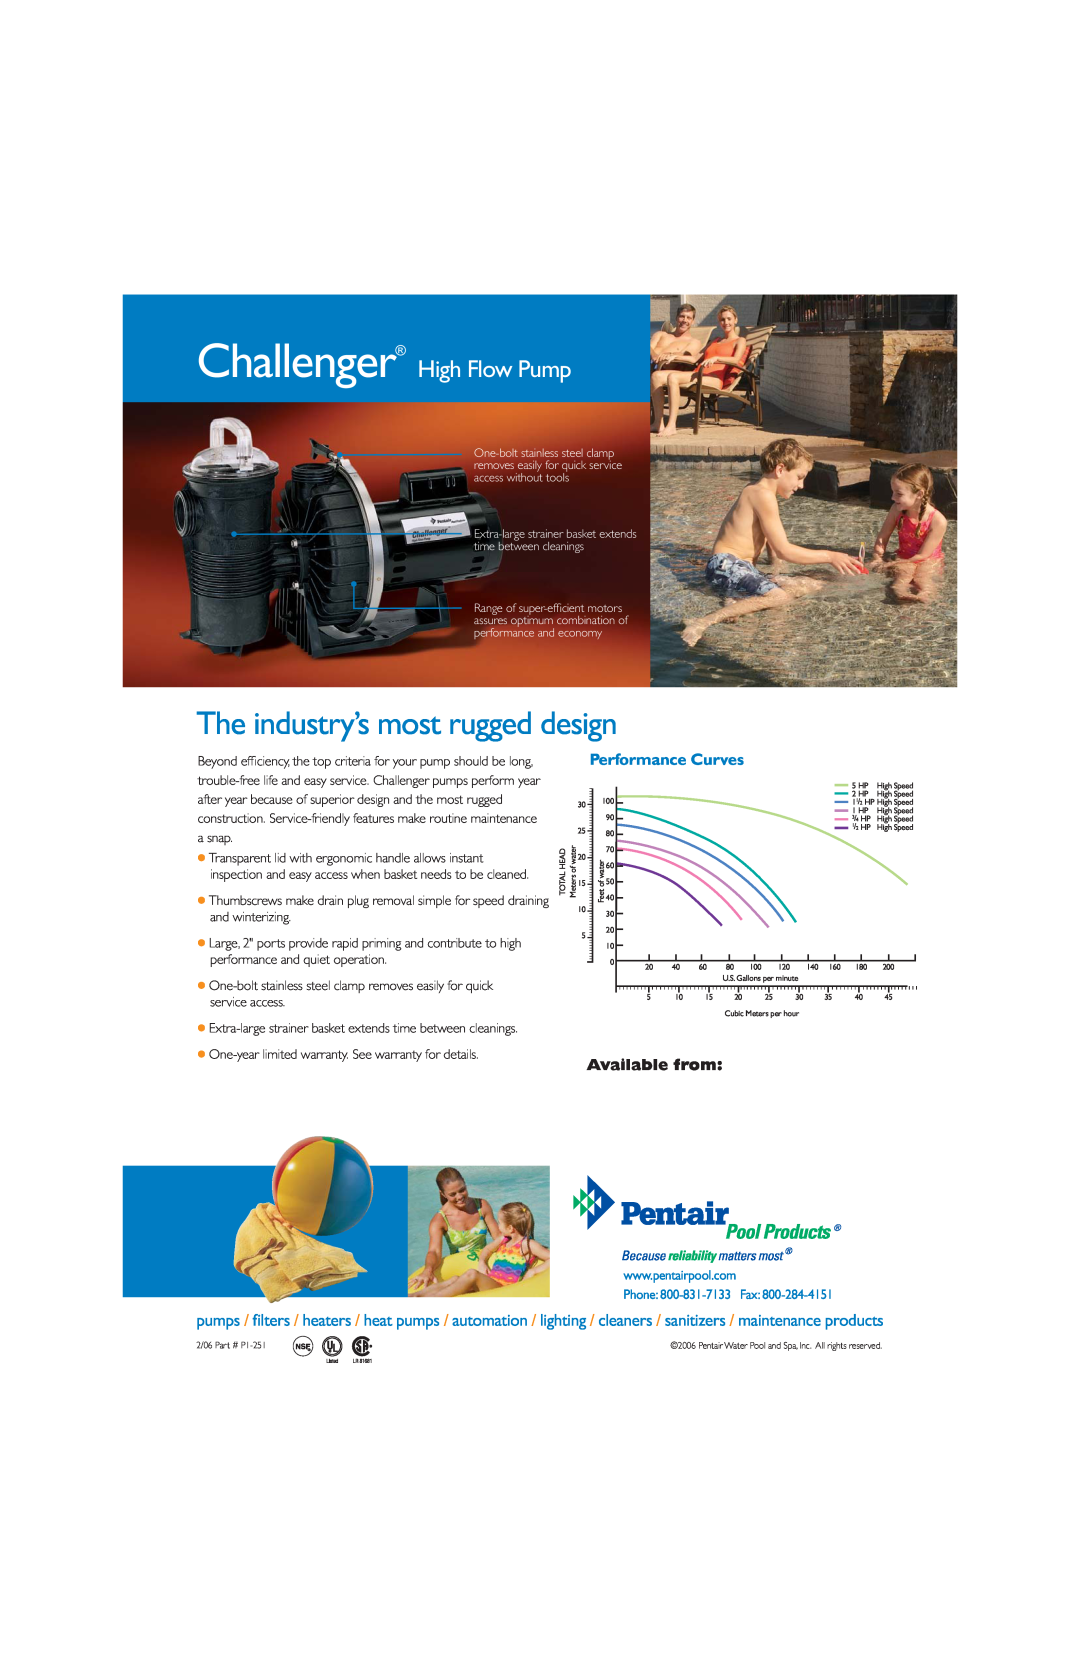 Pentair manual The industry’s most rugged design, Challenger High Flow Pump, Performance Curves, Available from 